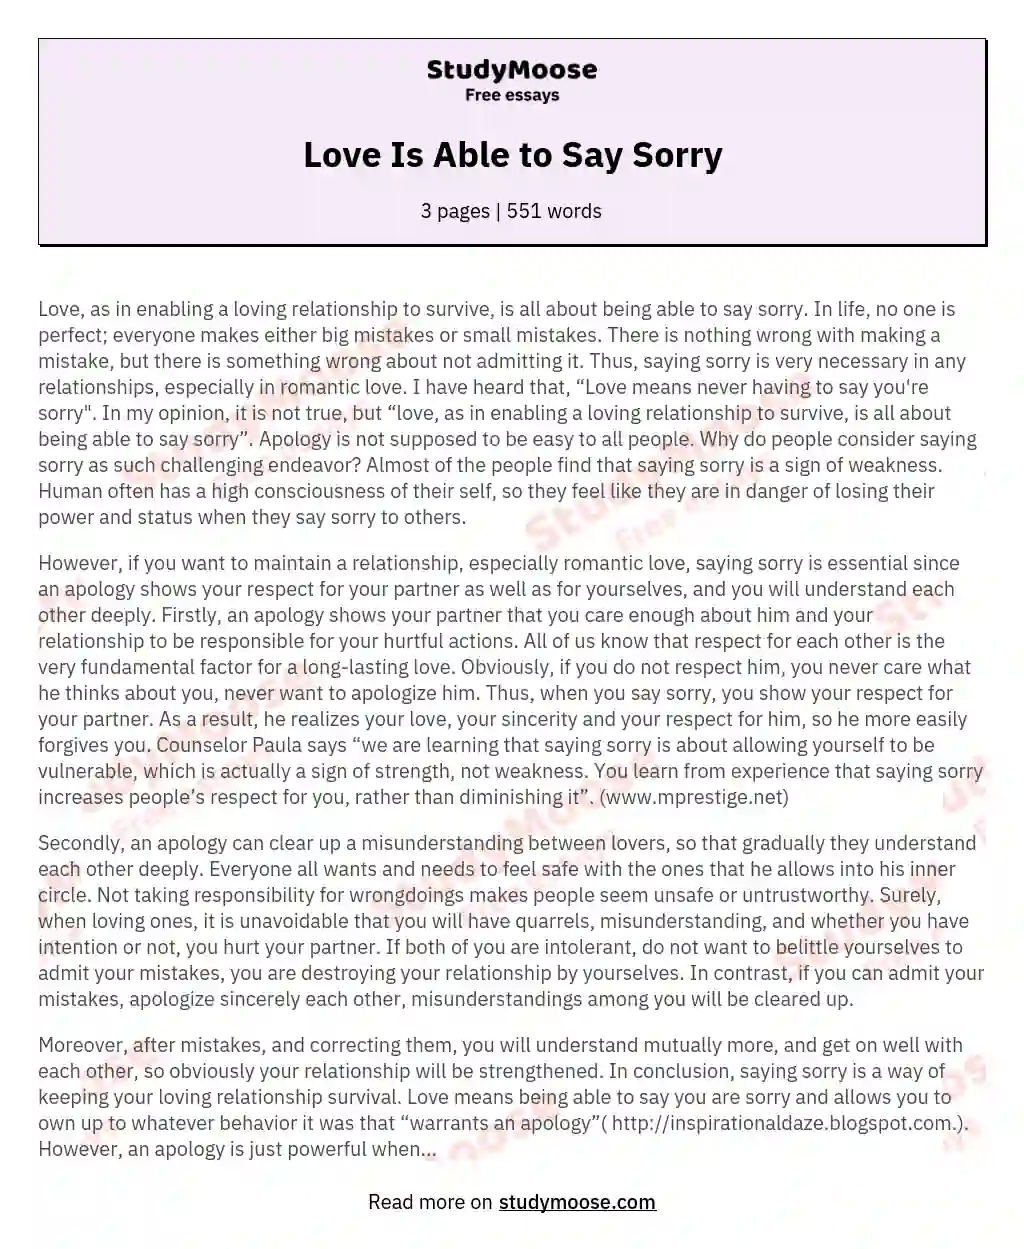 Love Is Able to Say Sorry